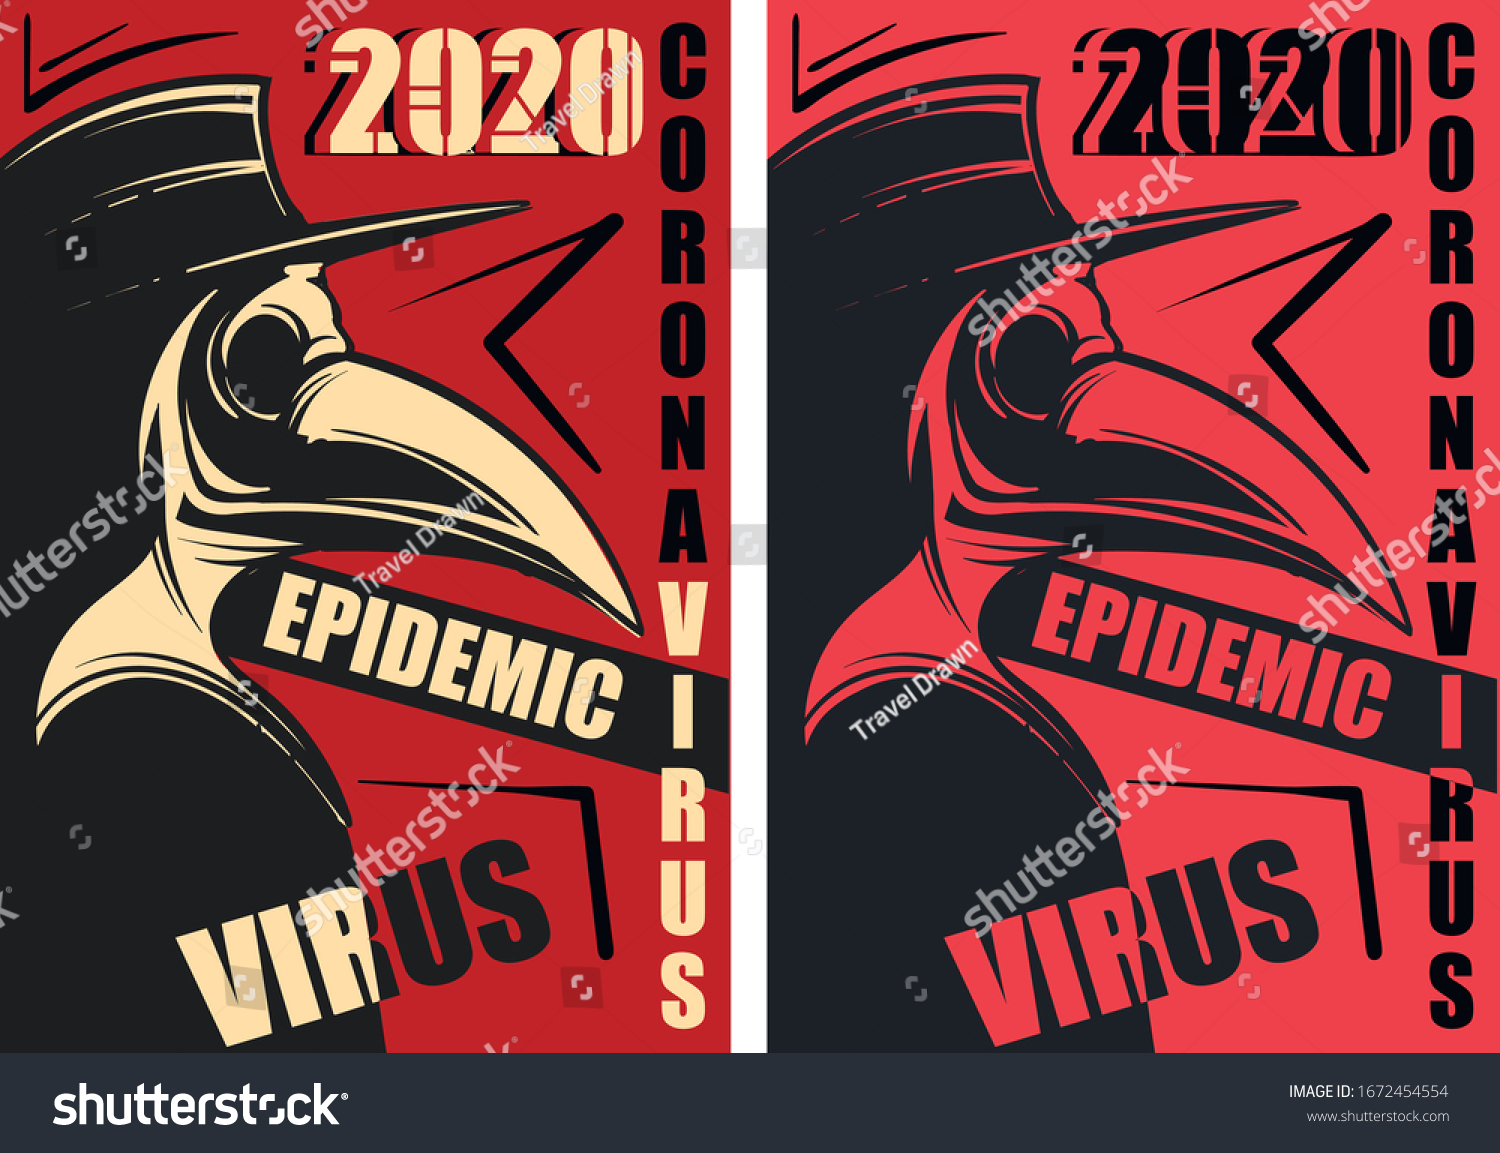 SVG of The red poster of the epidemic of the coronavirus. Image of a plague doctor on a vector illustration of a coronavirus. svg